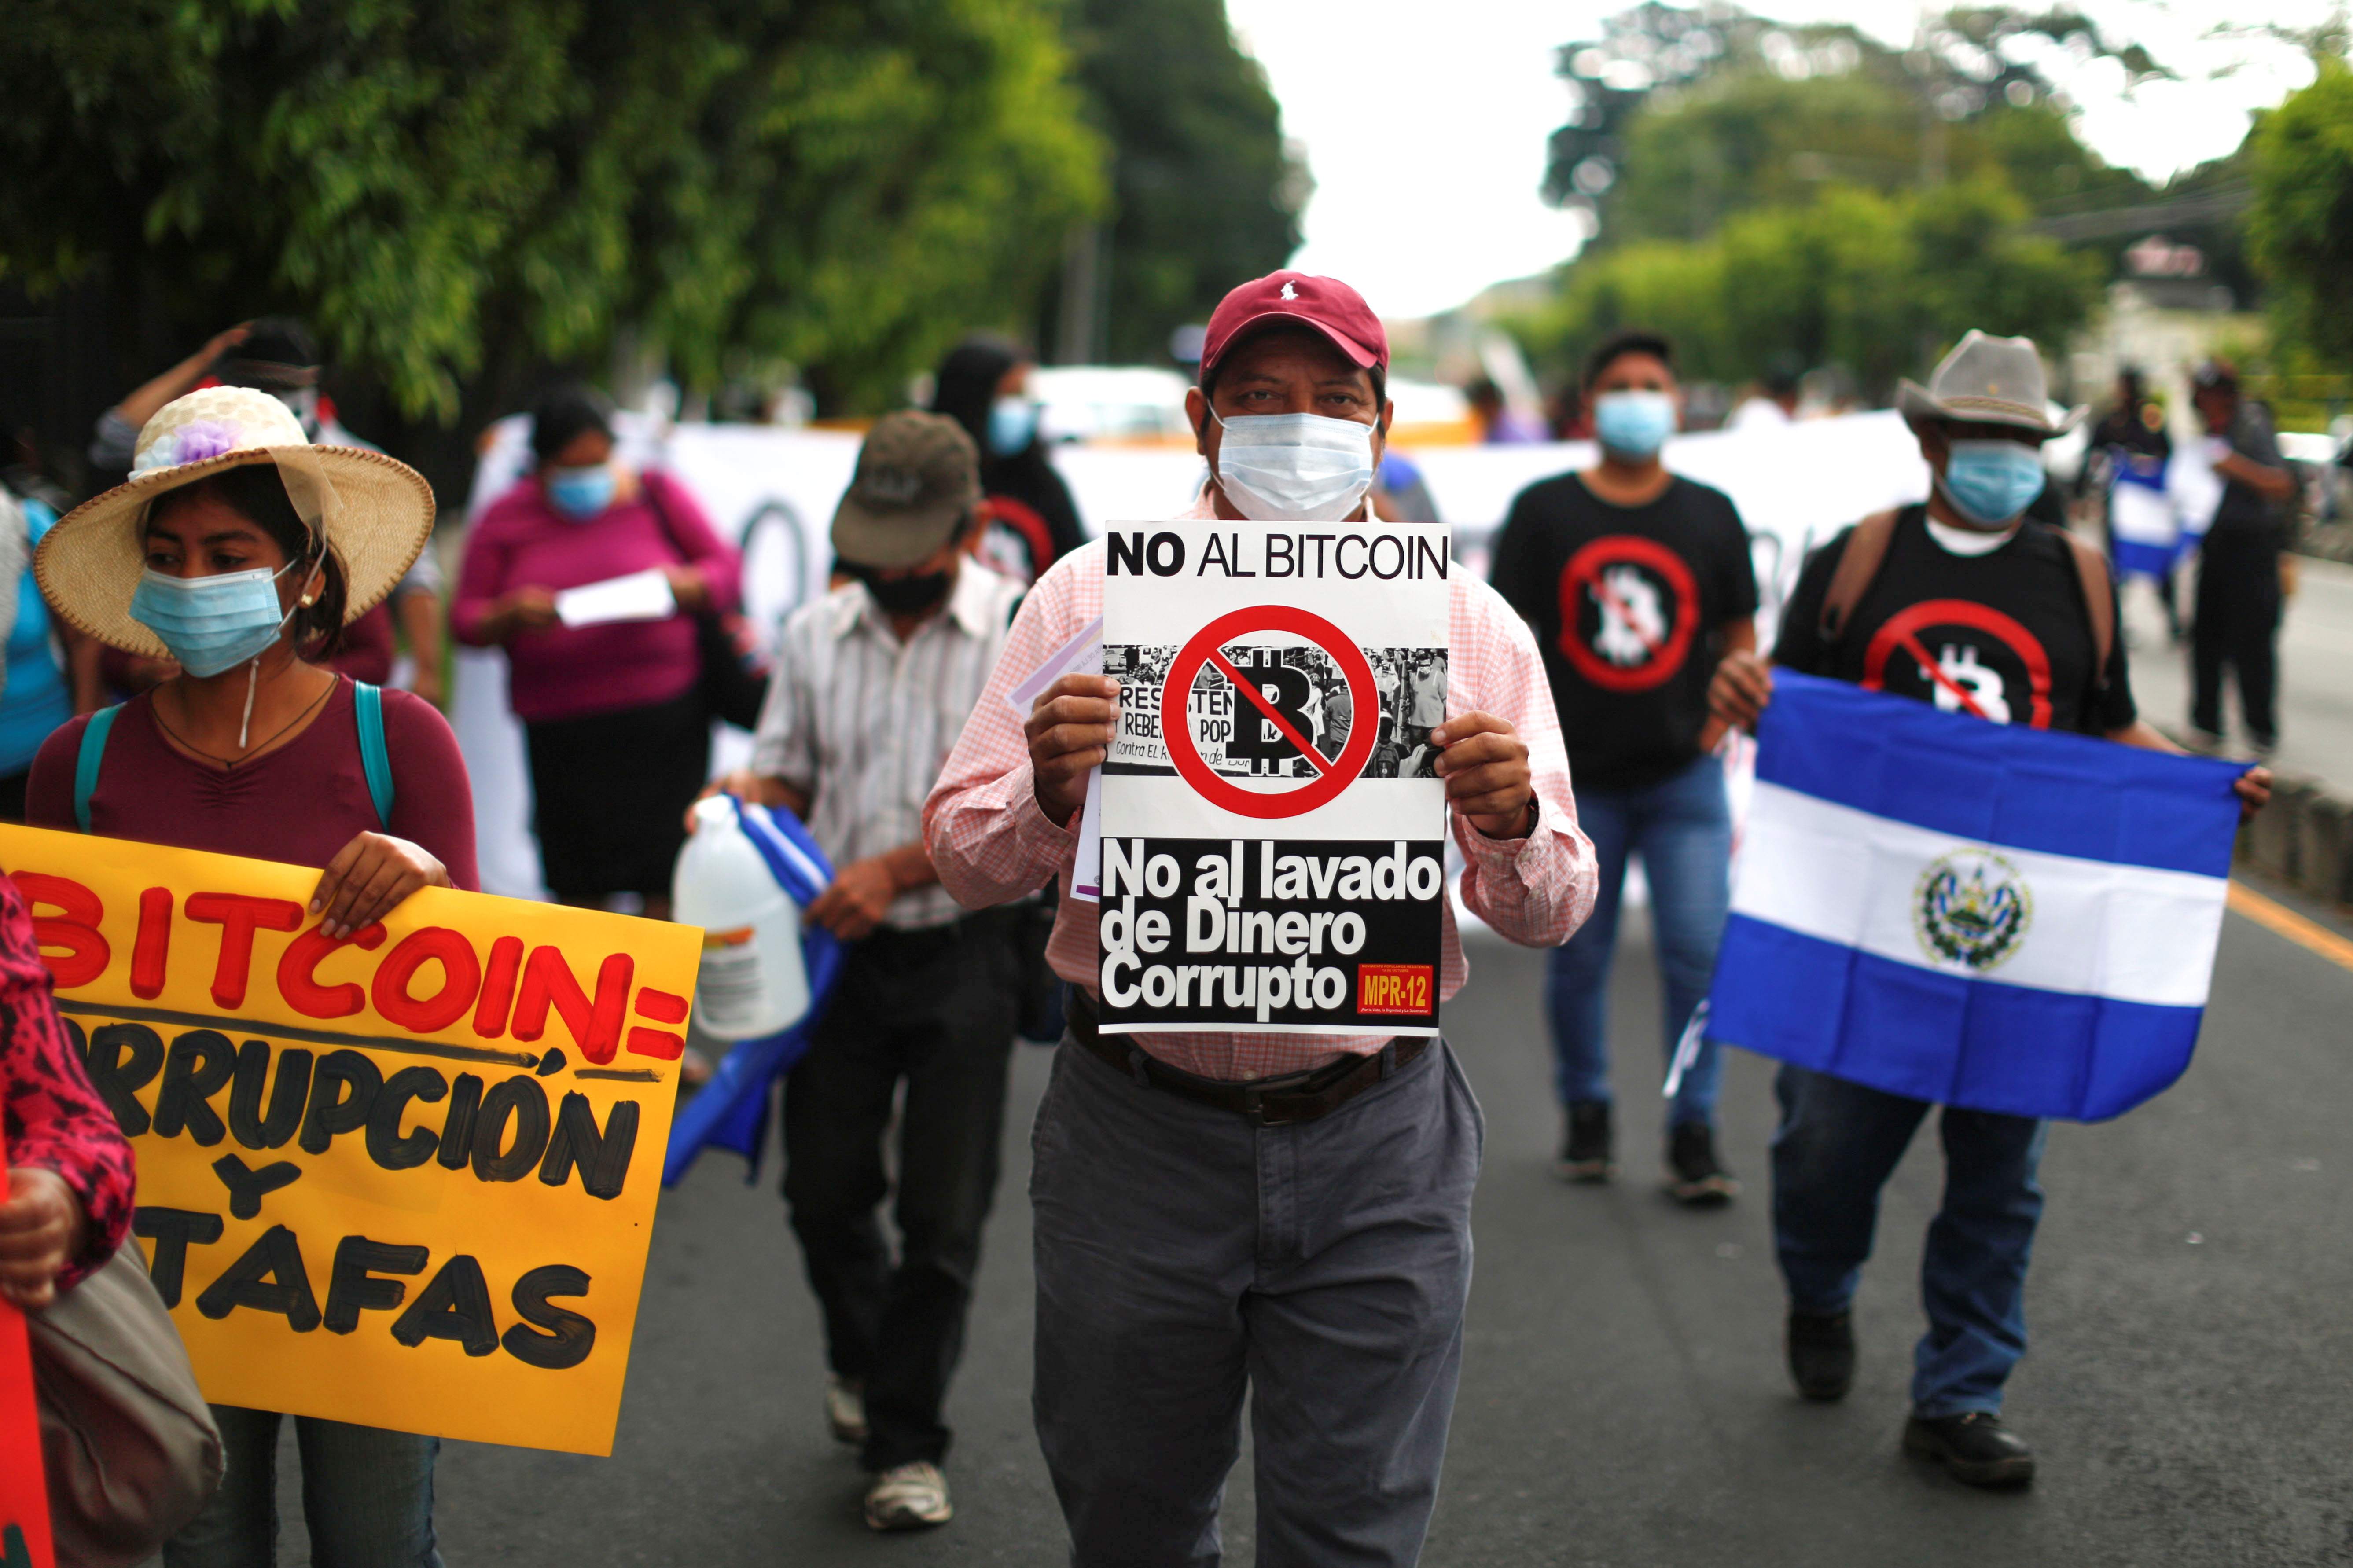 Union members take part in a protest against the use of Bitcoin as legal tender in San Salvador, El Salvador, September 1, 2021. REUTERS/Jose Cabezas